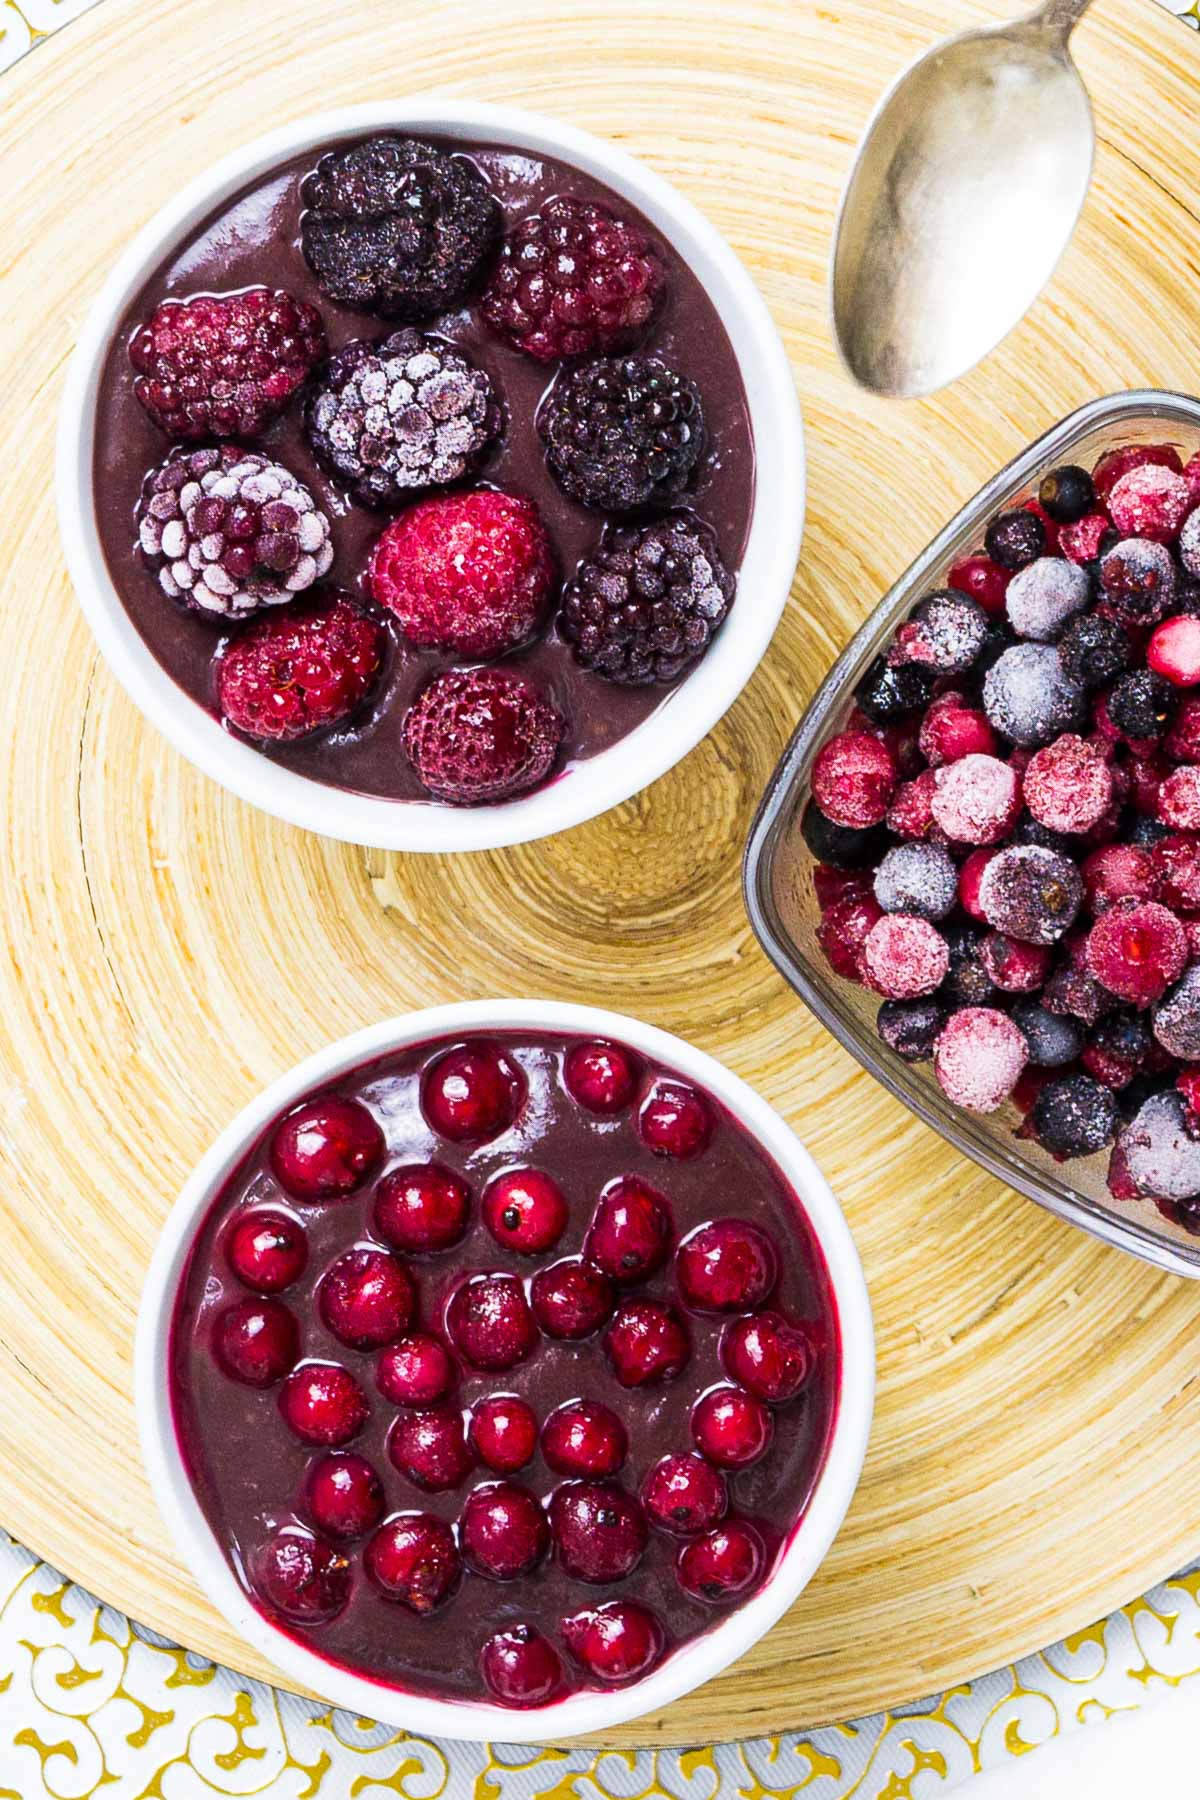 3 small bowls, one with vegan chocolate pudding topped with mixed berries, the other topped with red currant and one bowl is only fruits.